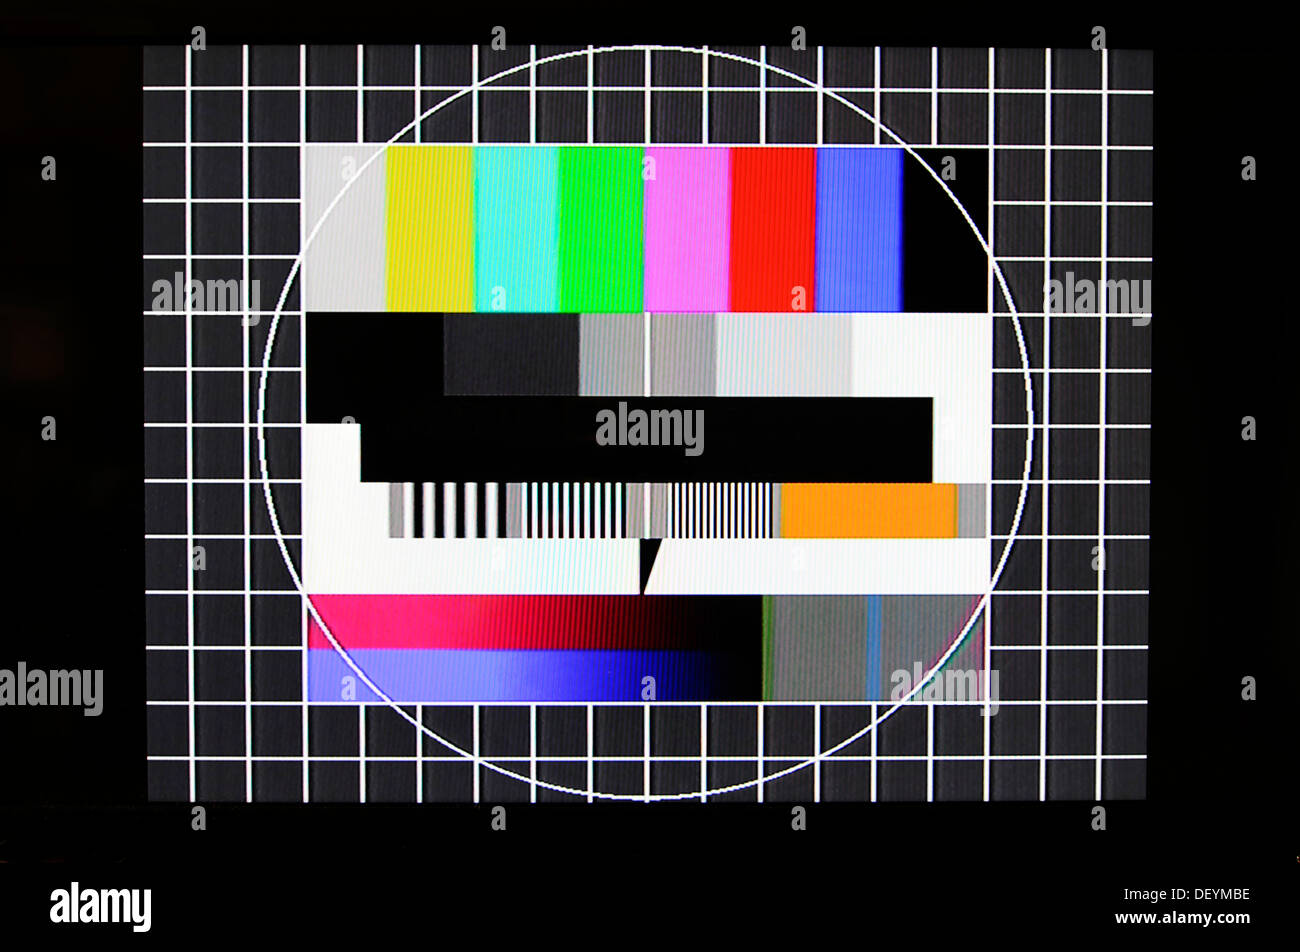 Television test pattern Stock Photo